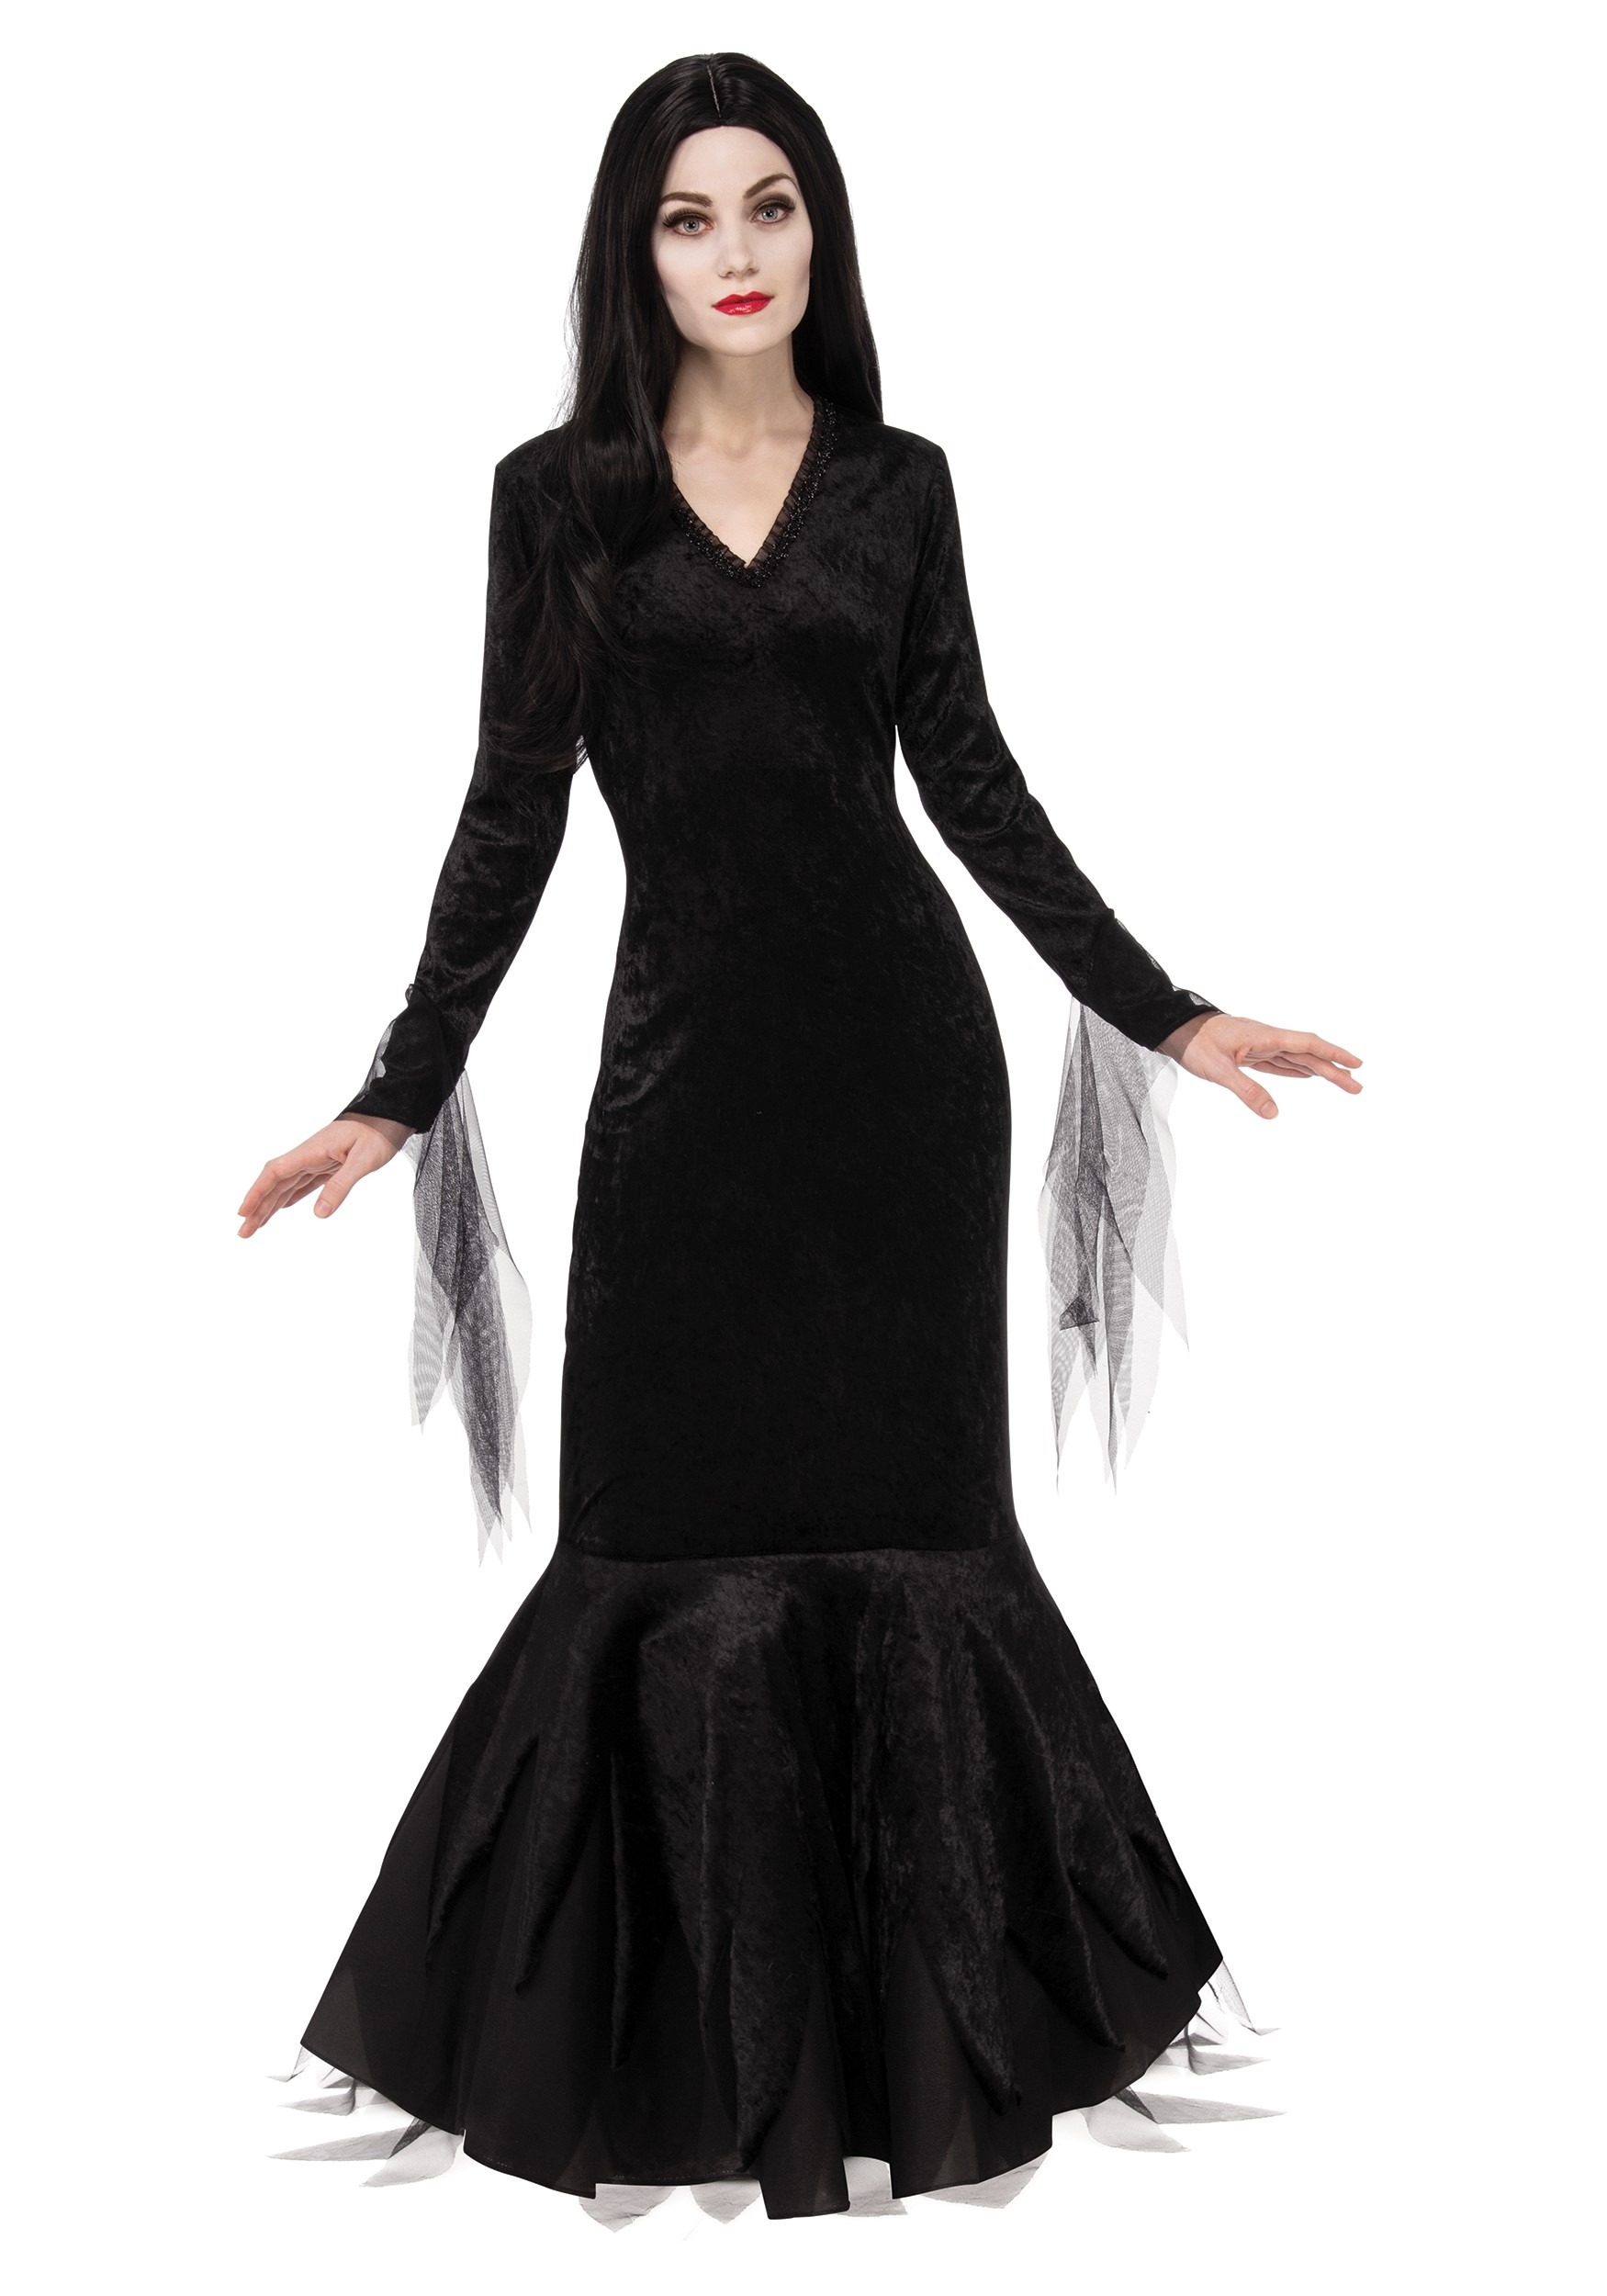 2023 Wednesday Addams Costume With Wigs For Kids Girls Tulle Belt Gothic  Black Dress Halloween Cosplay Night Costume Wigs